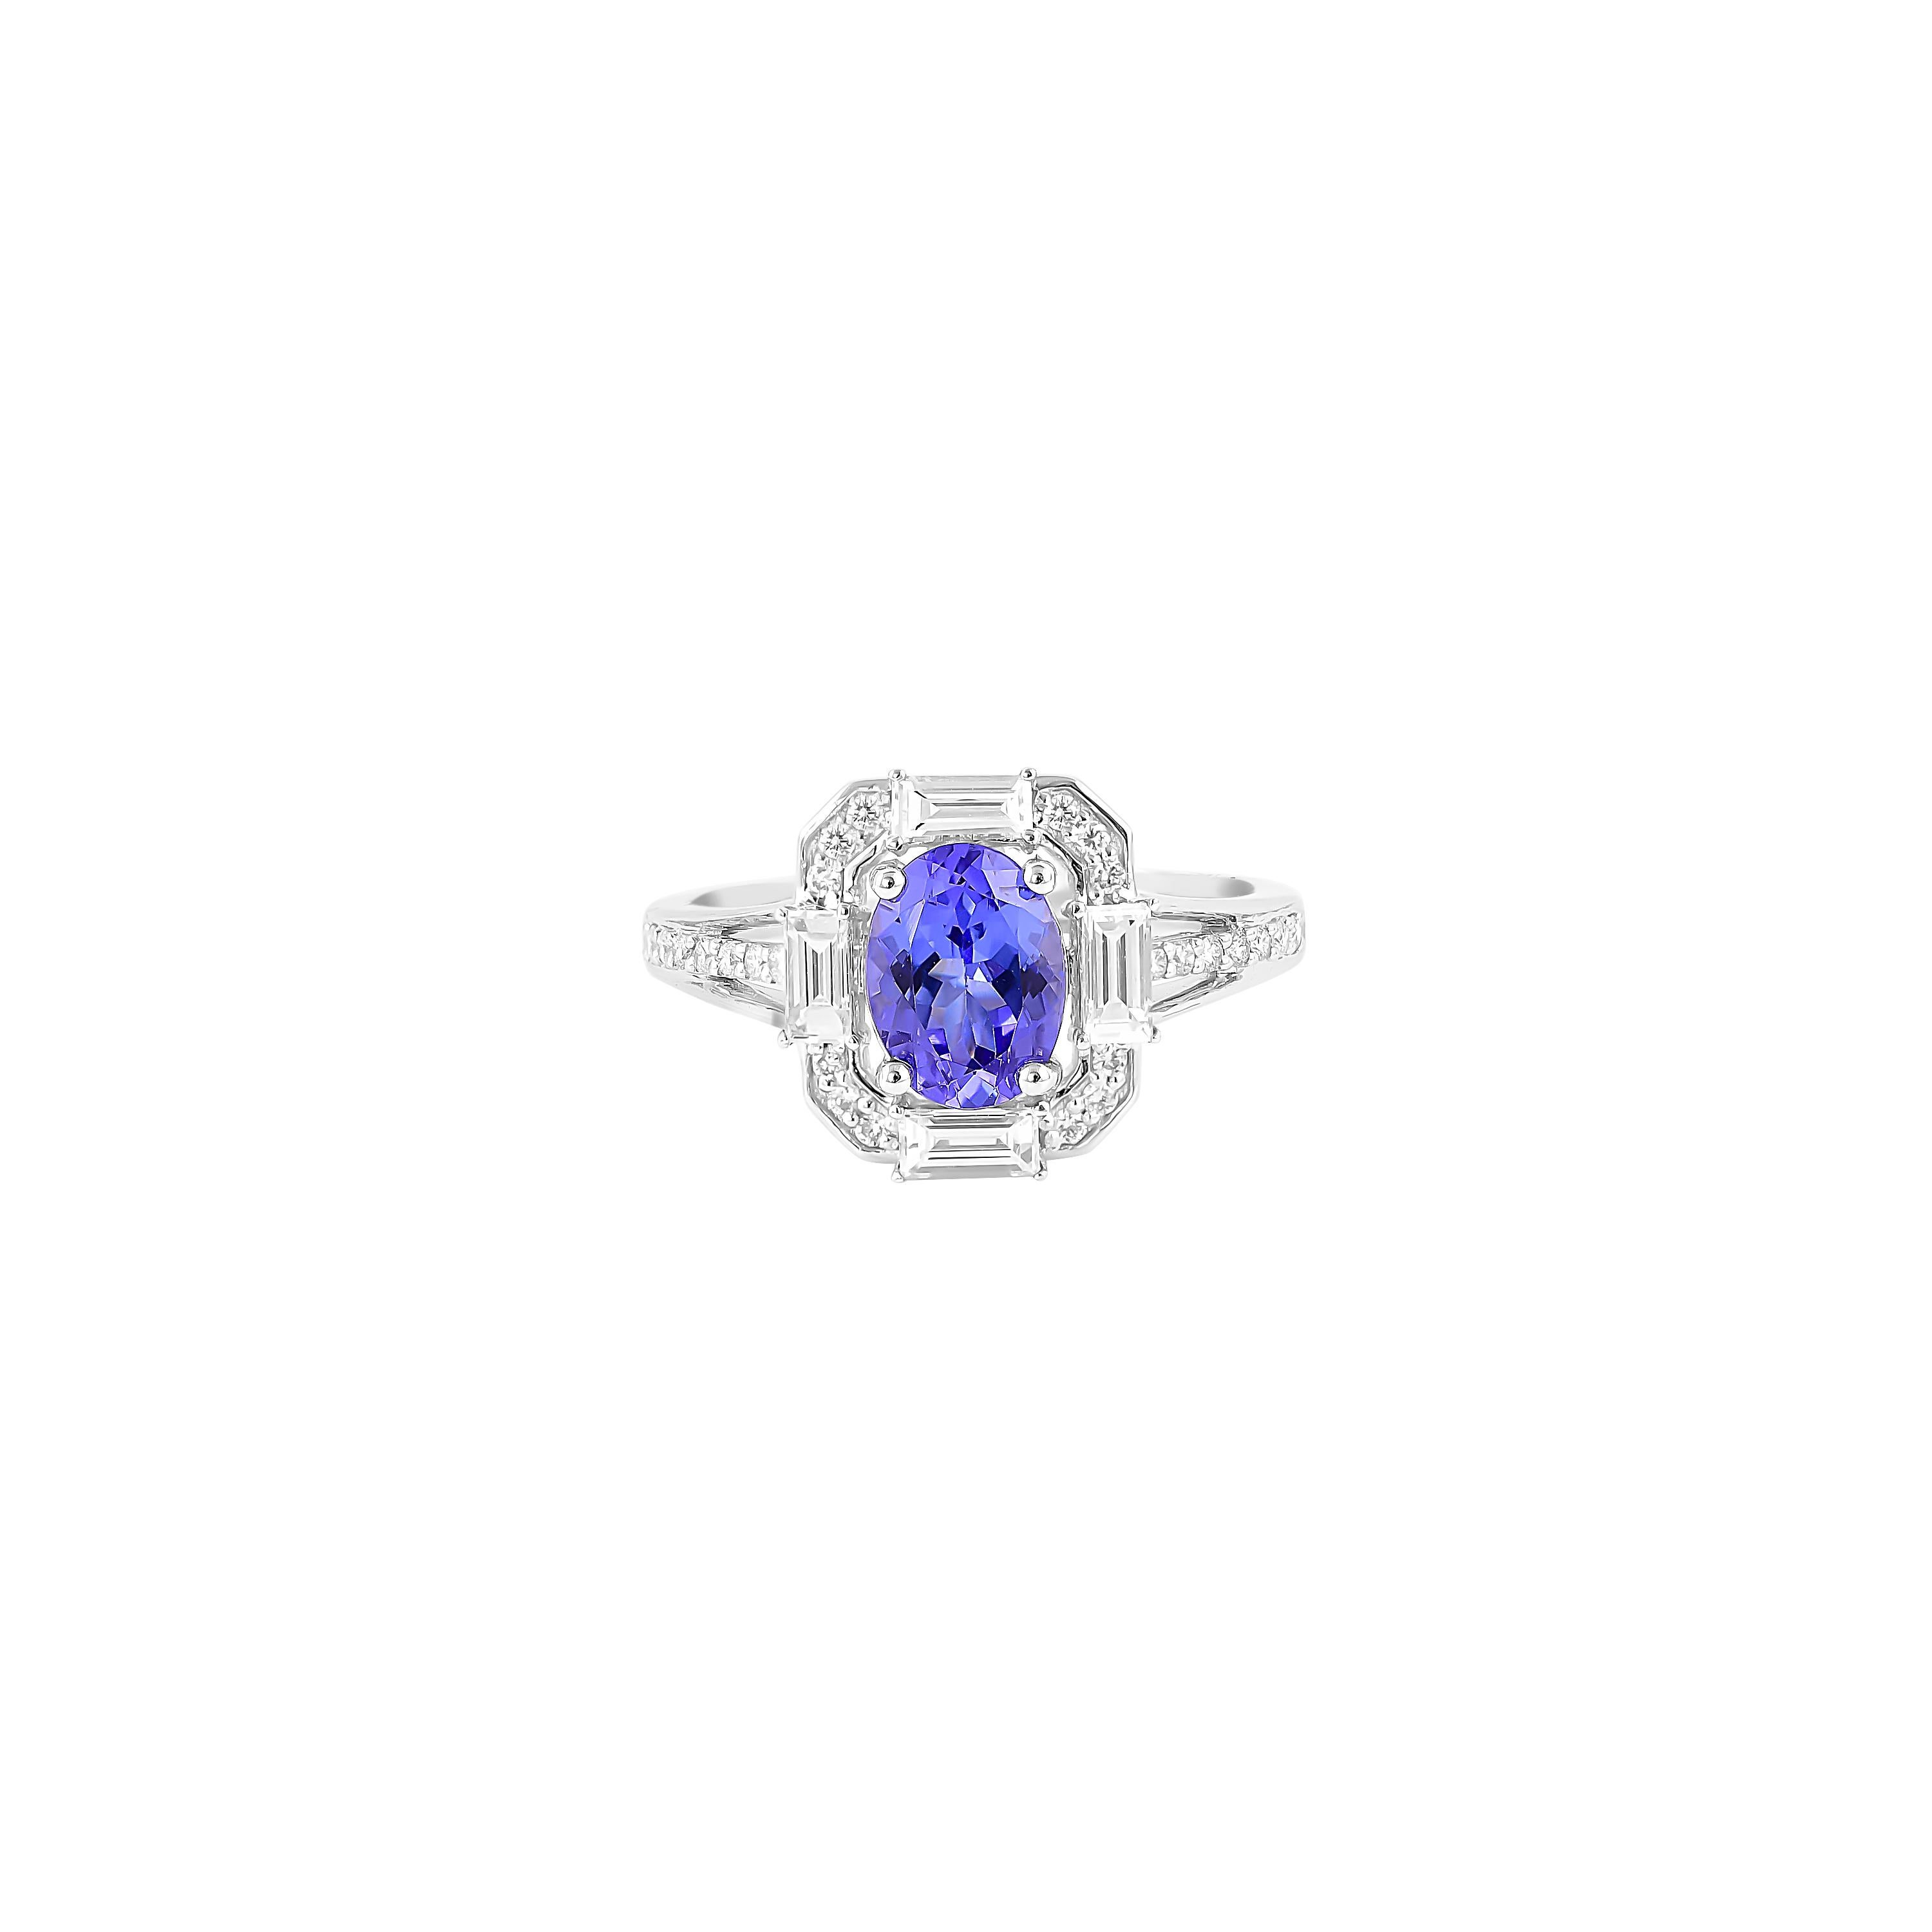 Oval Cut 1.322 Carat Tanzanite Ring in 18 Karat White Gold with Diamond. For Sale